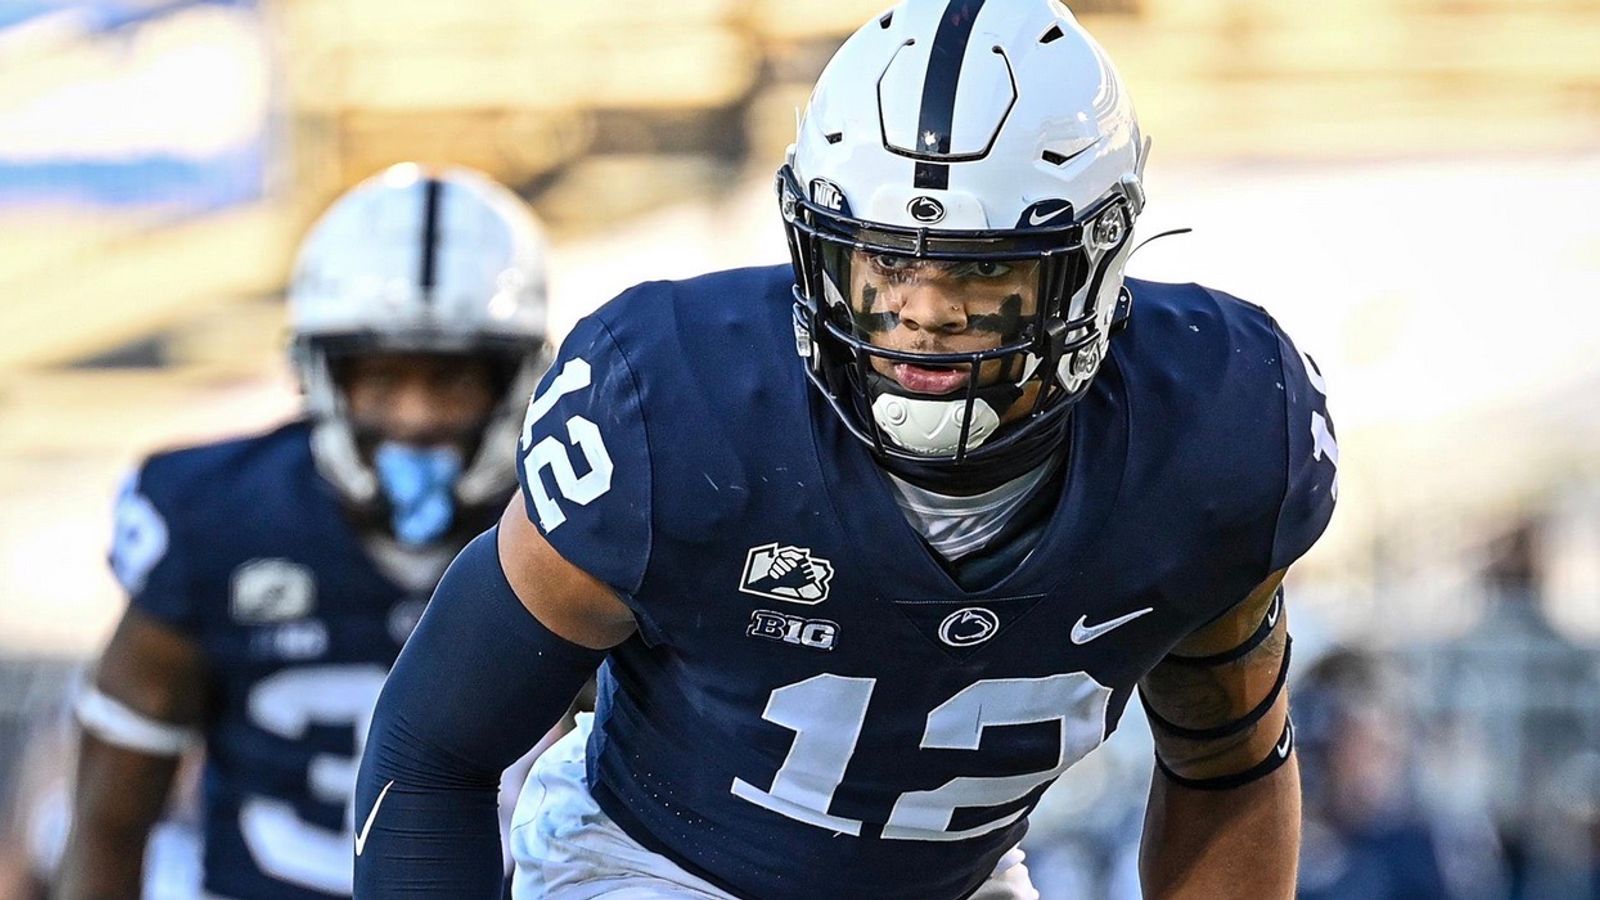 Two more PSU stars opt out of Outback Bowl to prepare for NFL draft